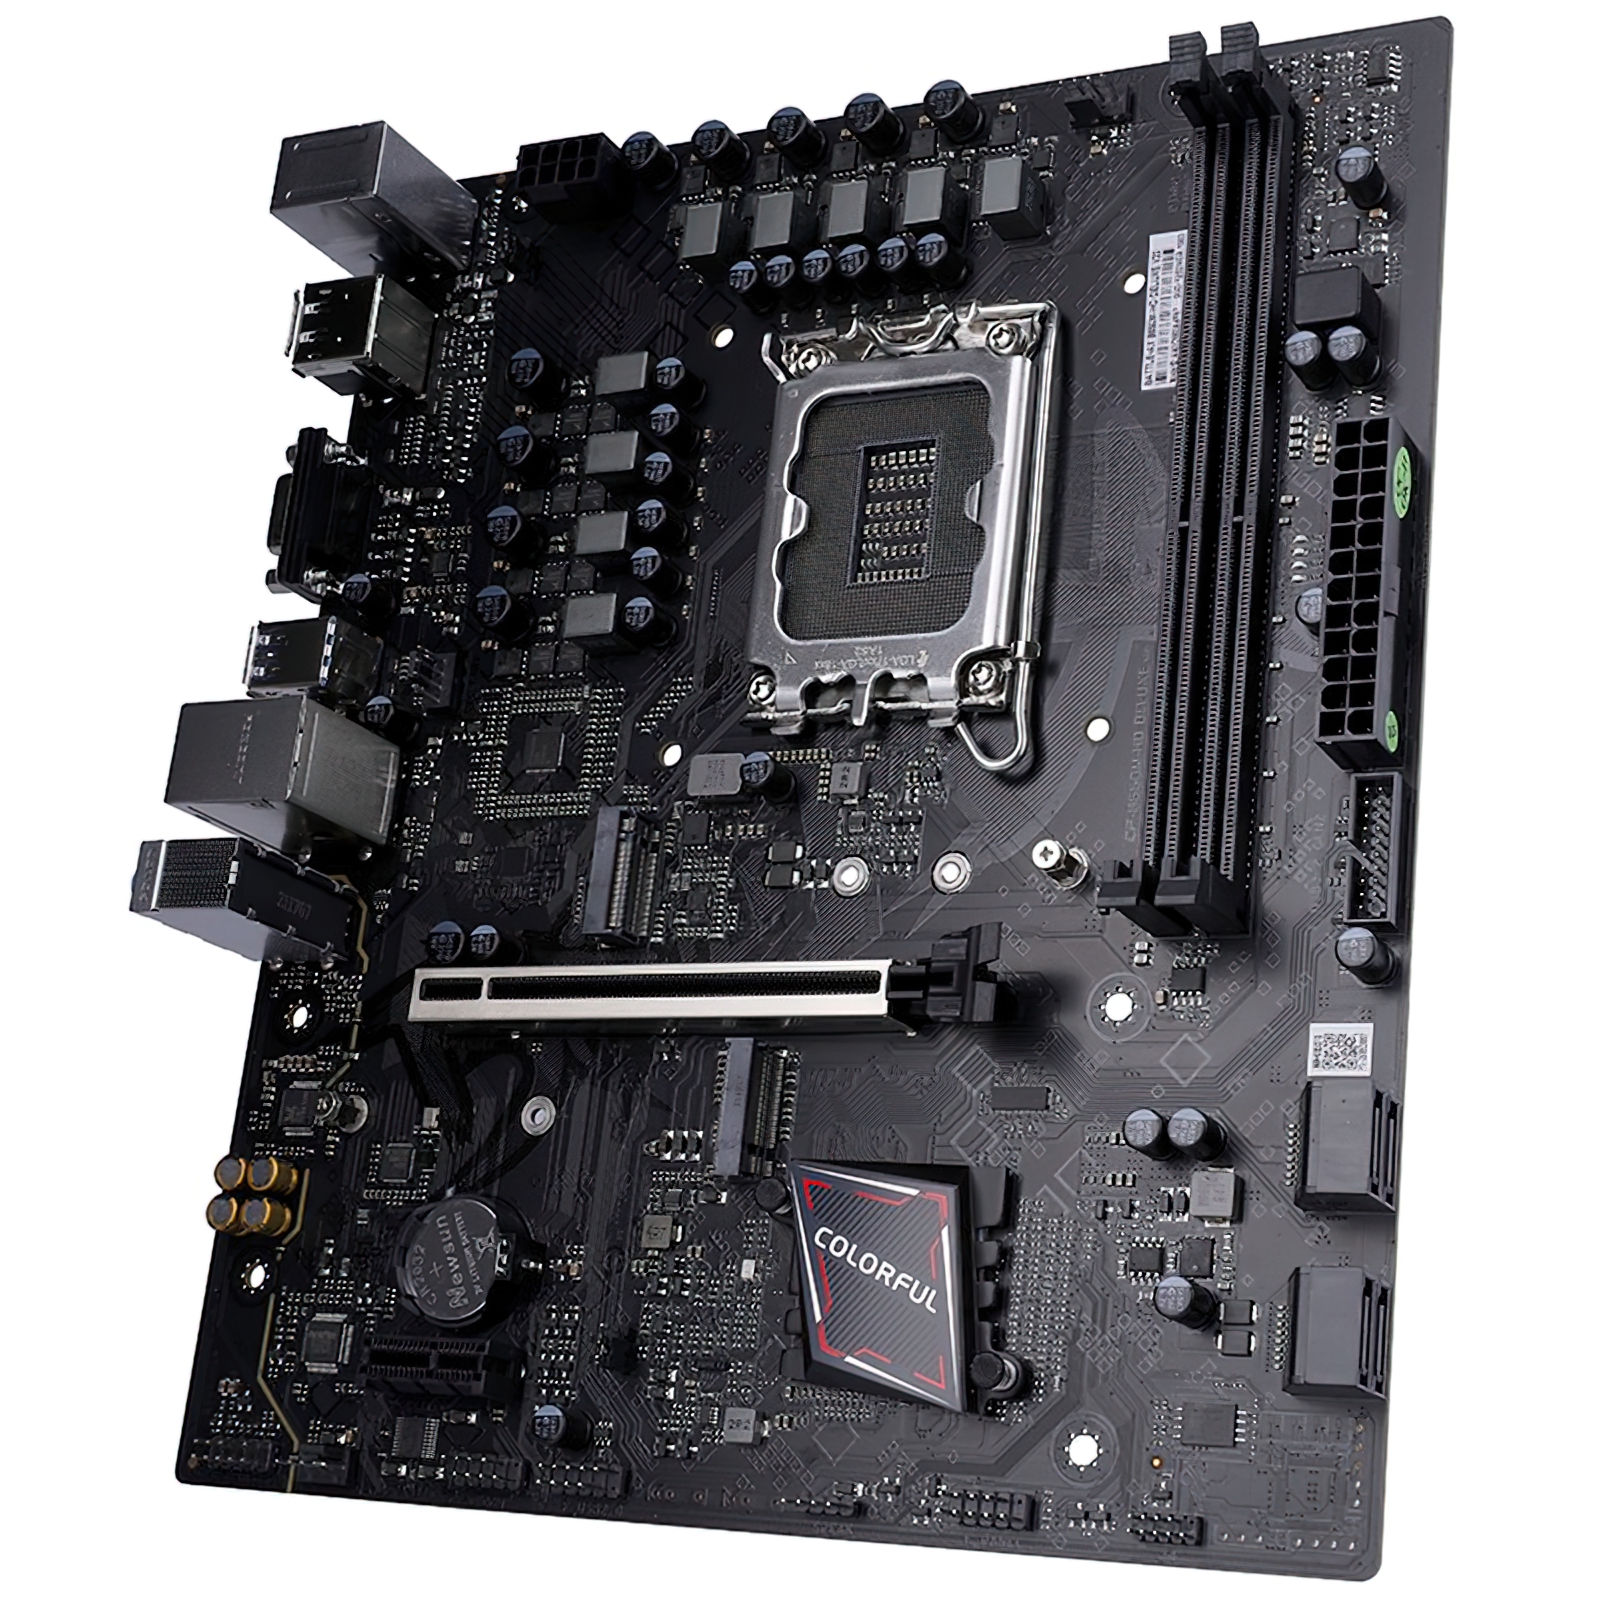 Colorful B660M-HD DELUXE BATTLE AX V20 - DDR4 12th Gen Intel Socket 1700 Gaming Motheboard - COLORFUL 2.35.66.00.014